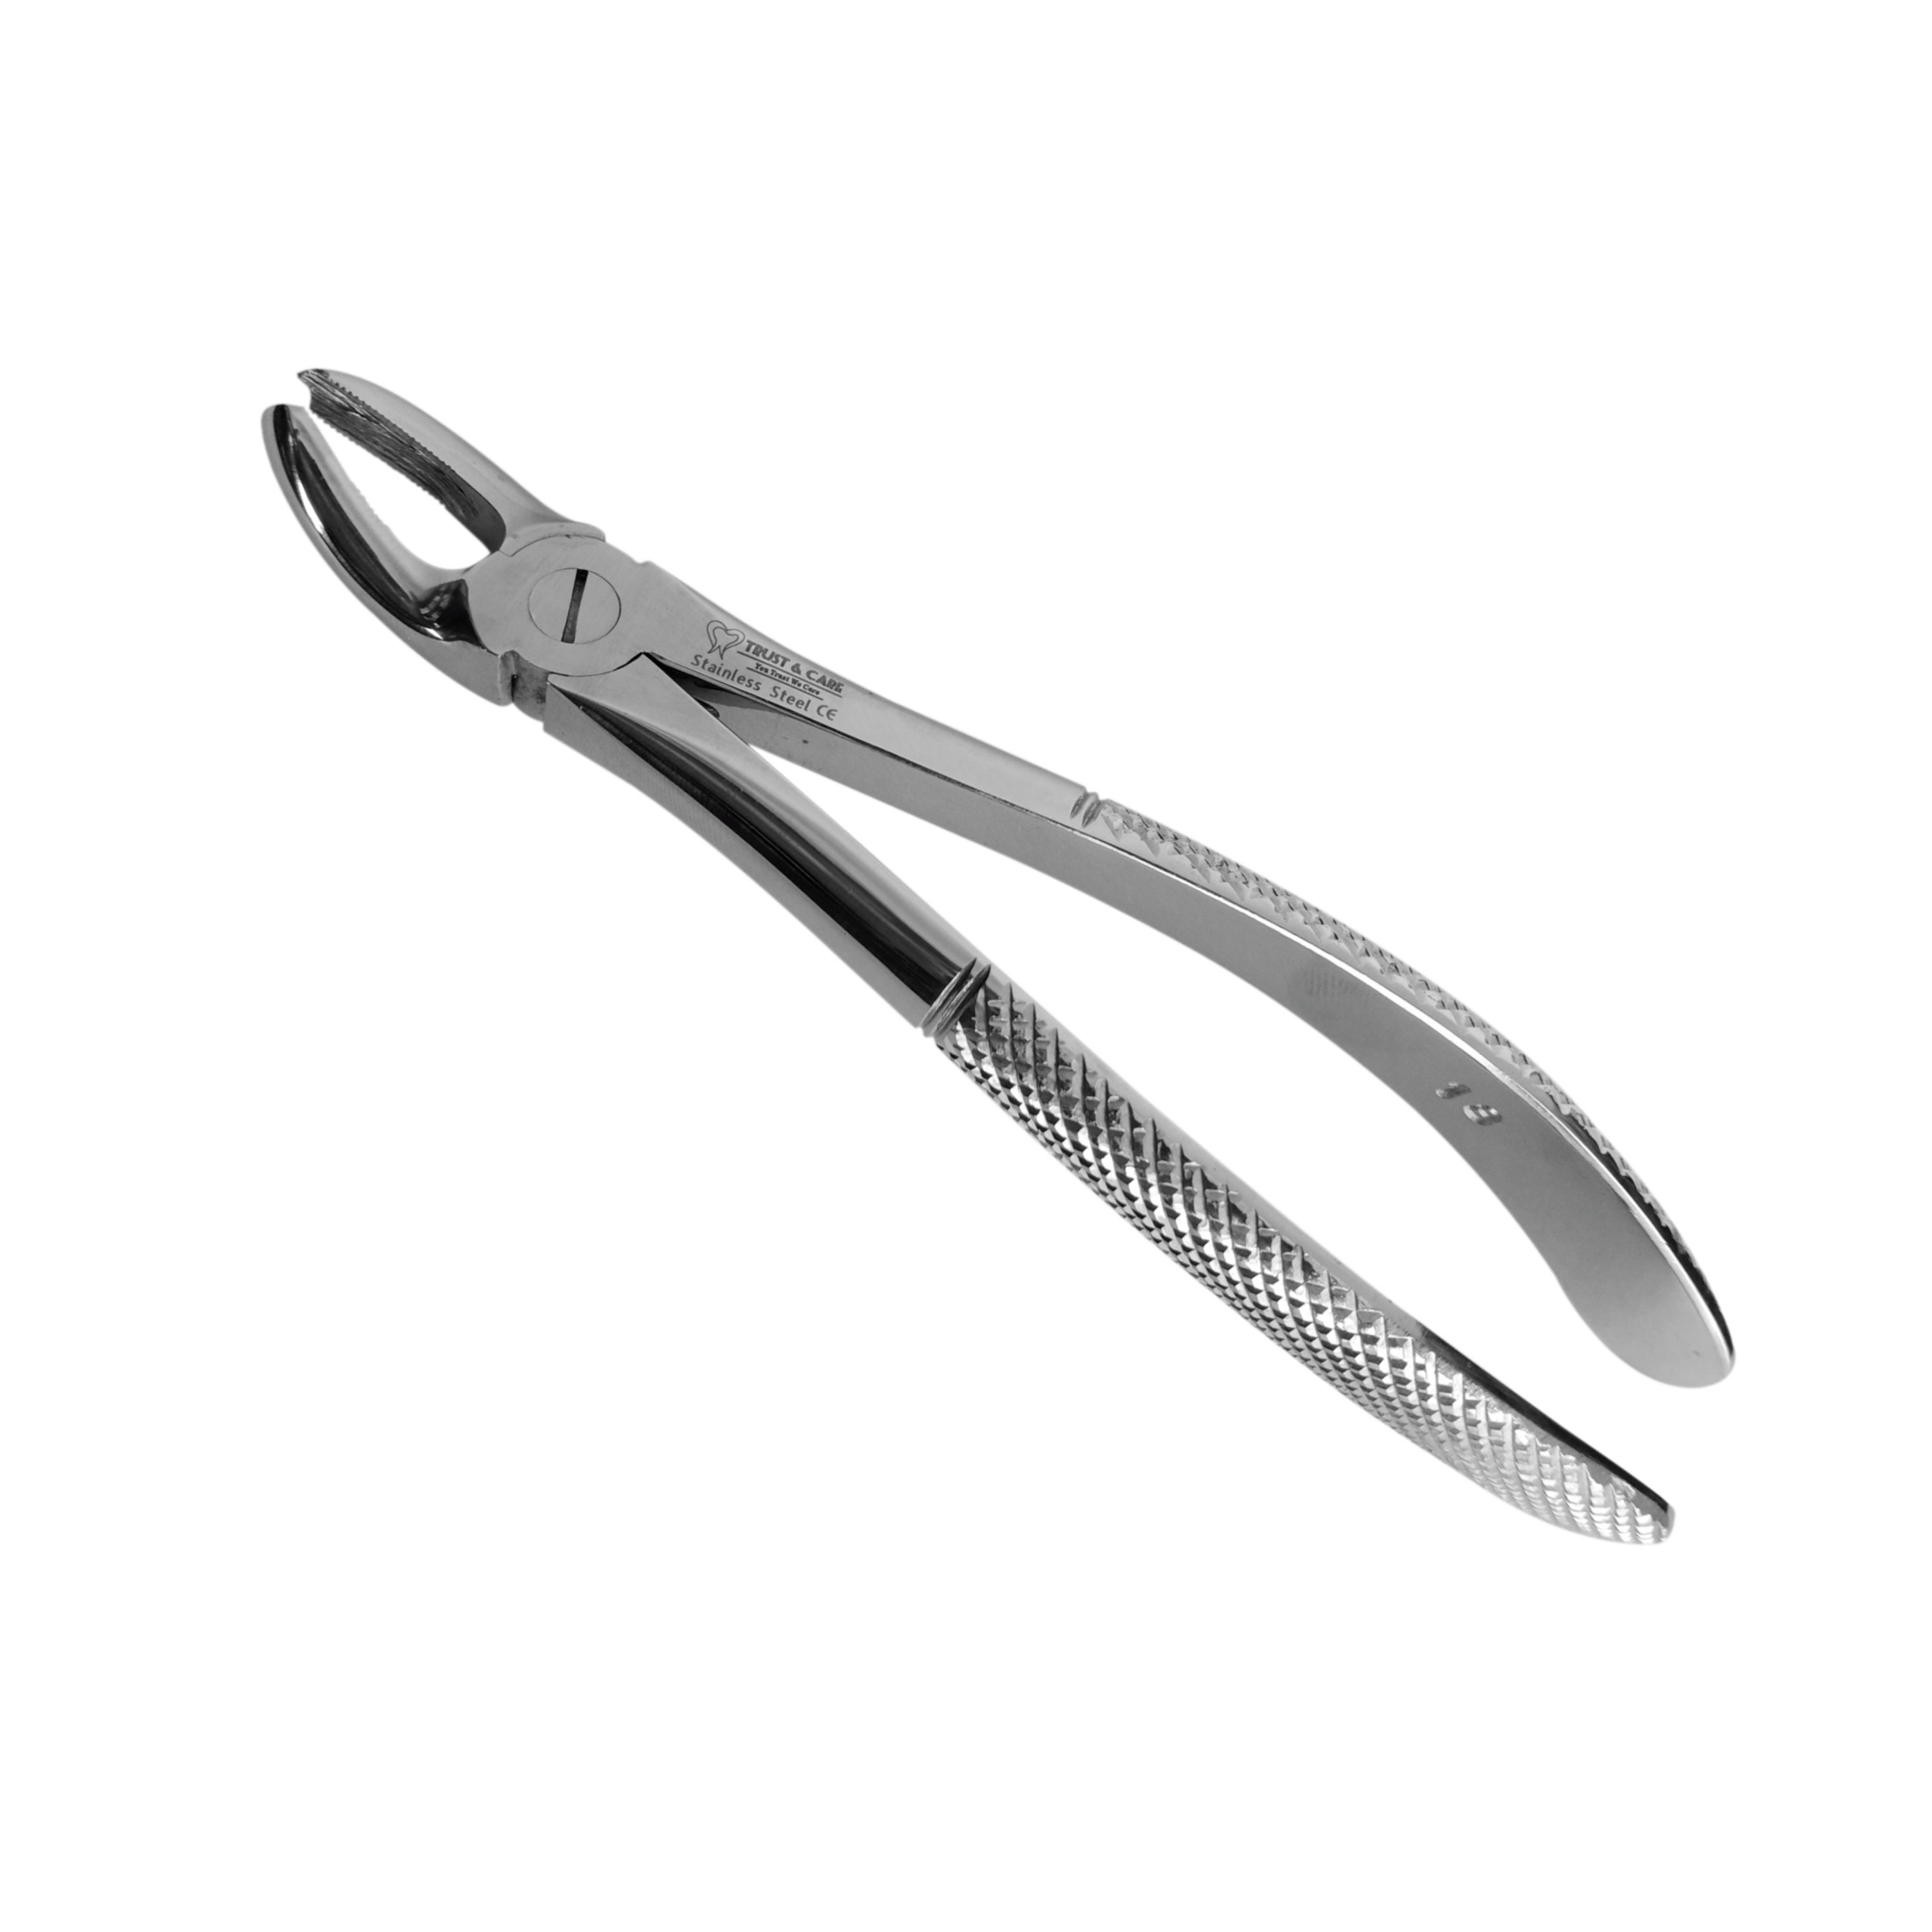 Trust & Care Tooth Extraction Forcep Upper Molars Left Fig No. 18 Standard